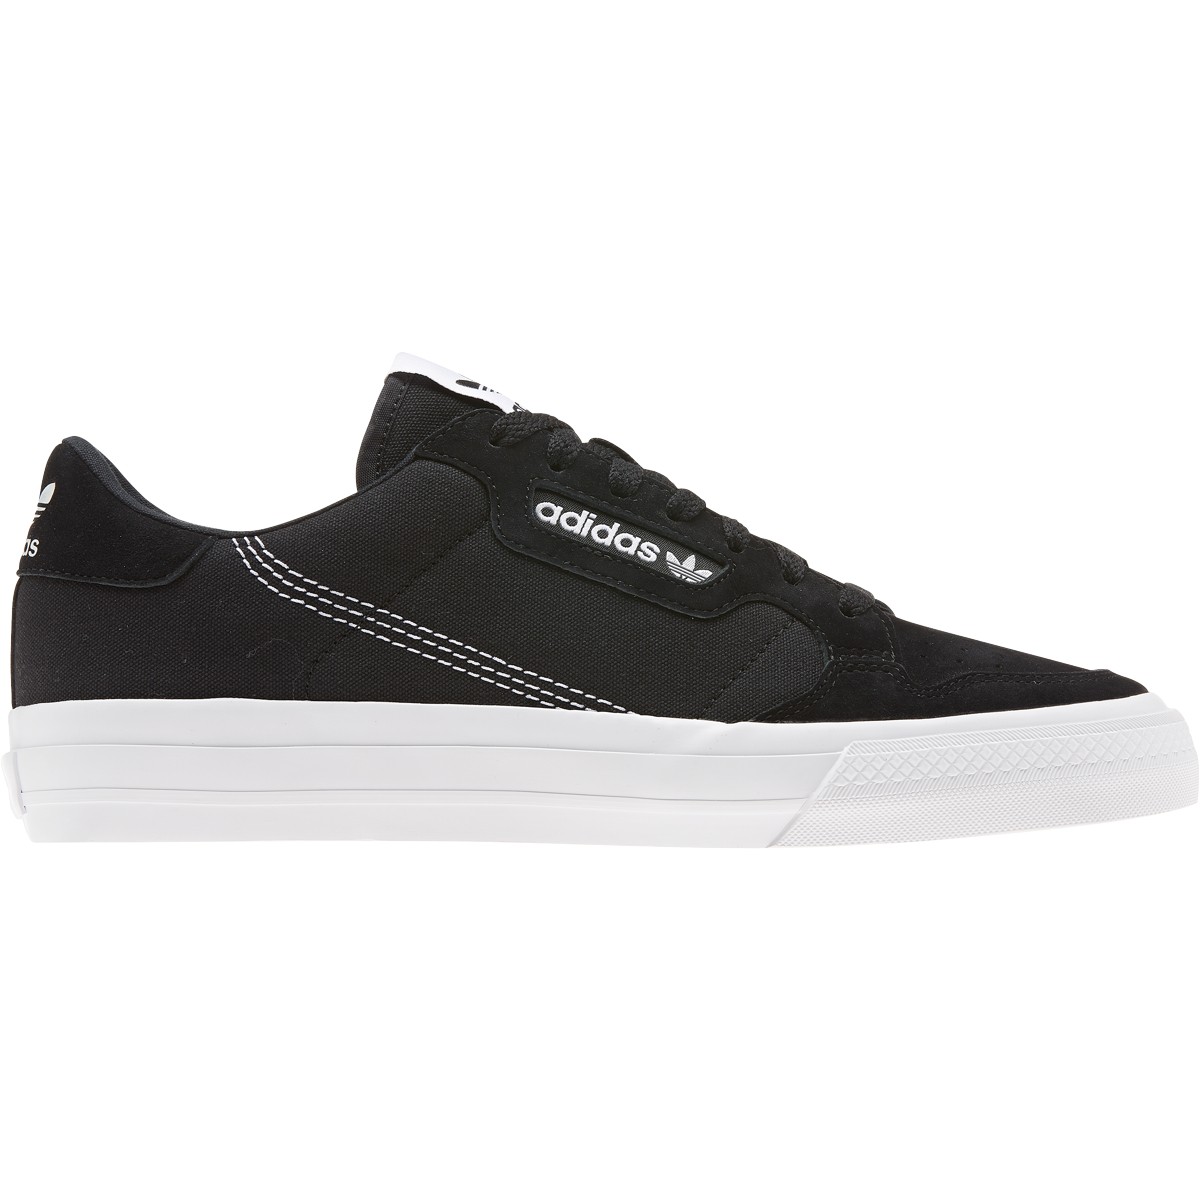 - Fashion Sneakers ,Continental Vulc - Brands Expert